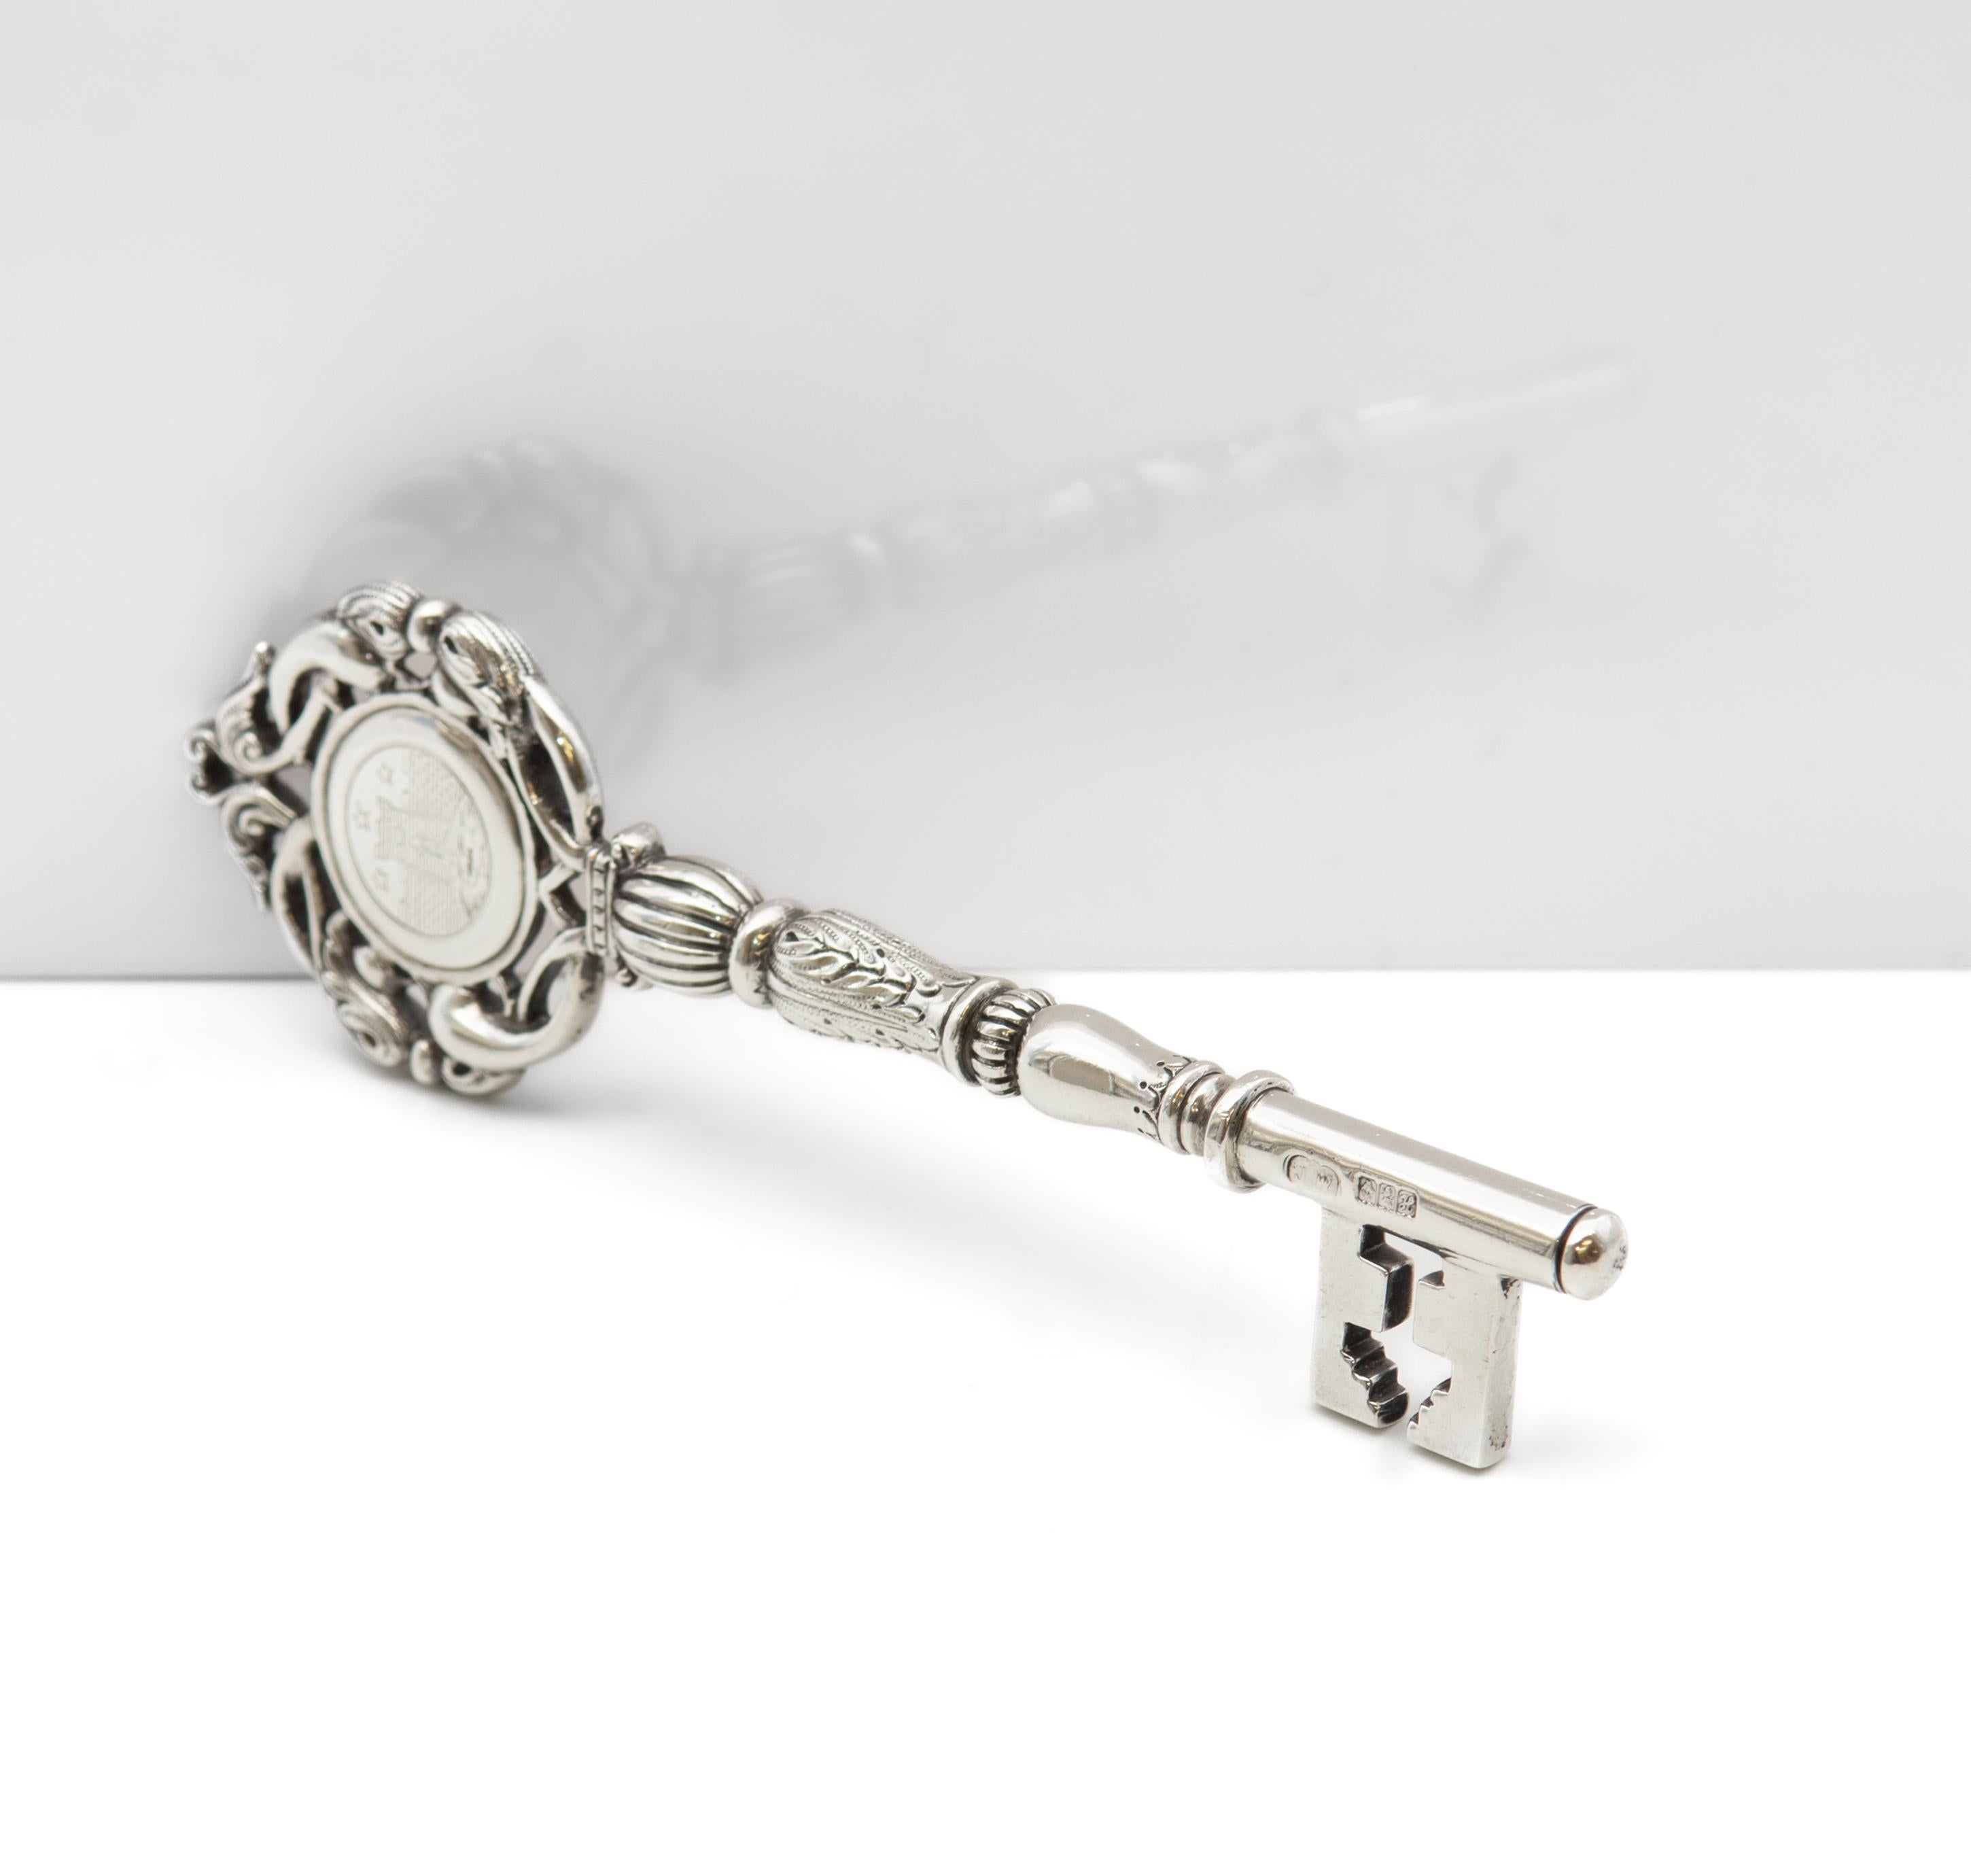 Edwardian Scottish Silver Presentation Key For The Perry Bandstand 1905 For Sale 2